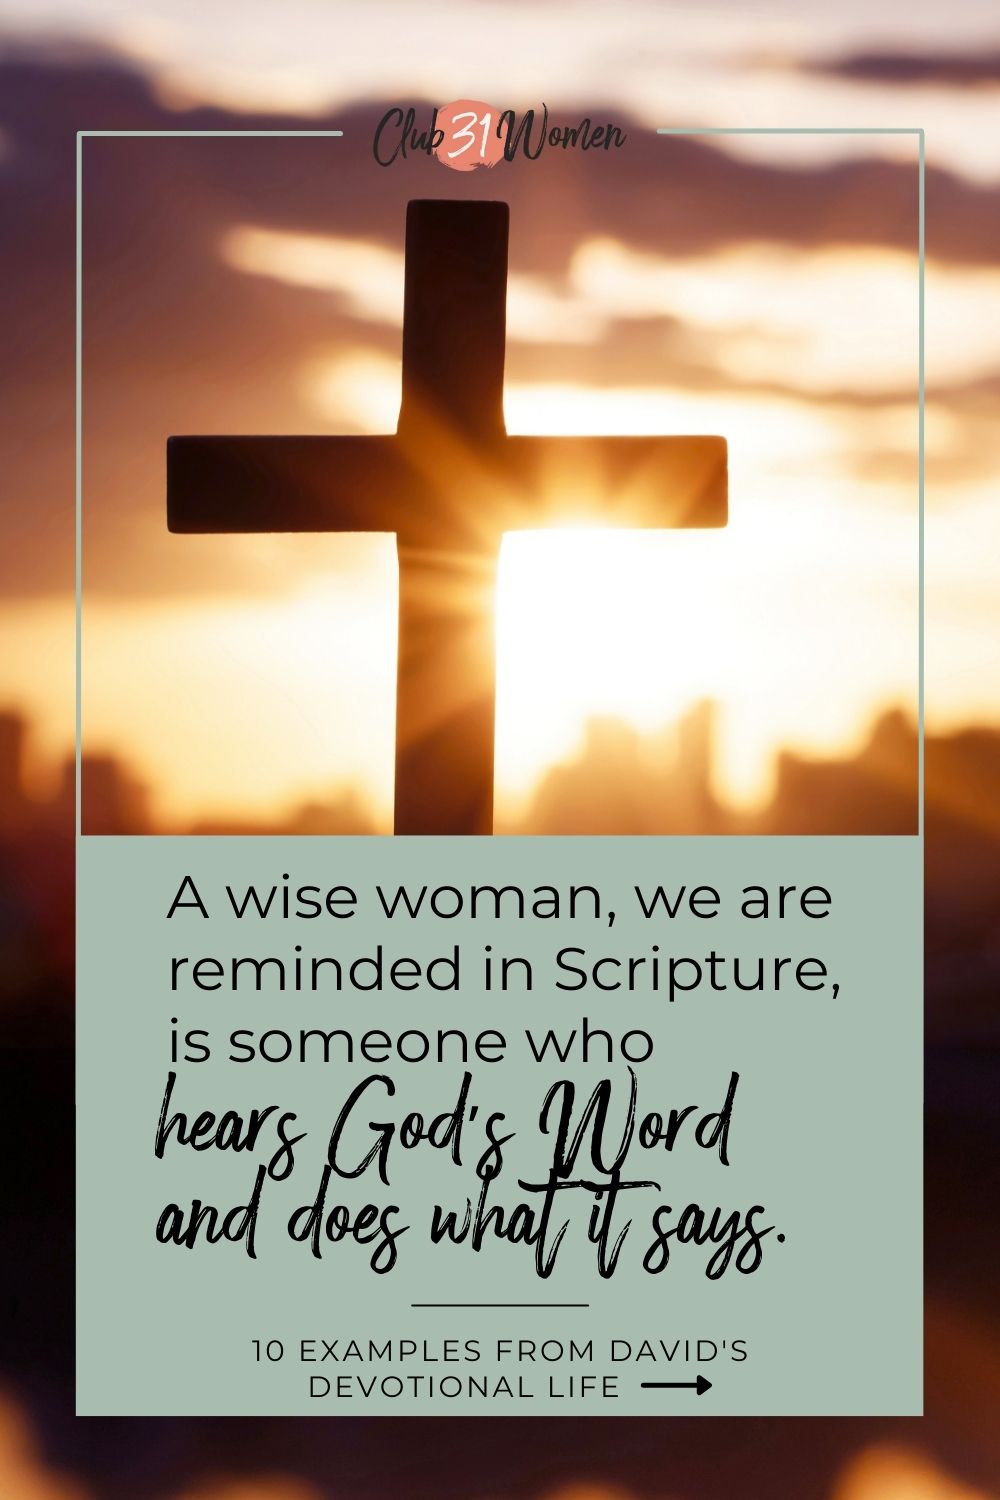 David teaches us so much about worship and repentance. He actually offers some very practical, intentional steps we can take to become women after God's own heart. via @Club31Women